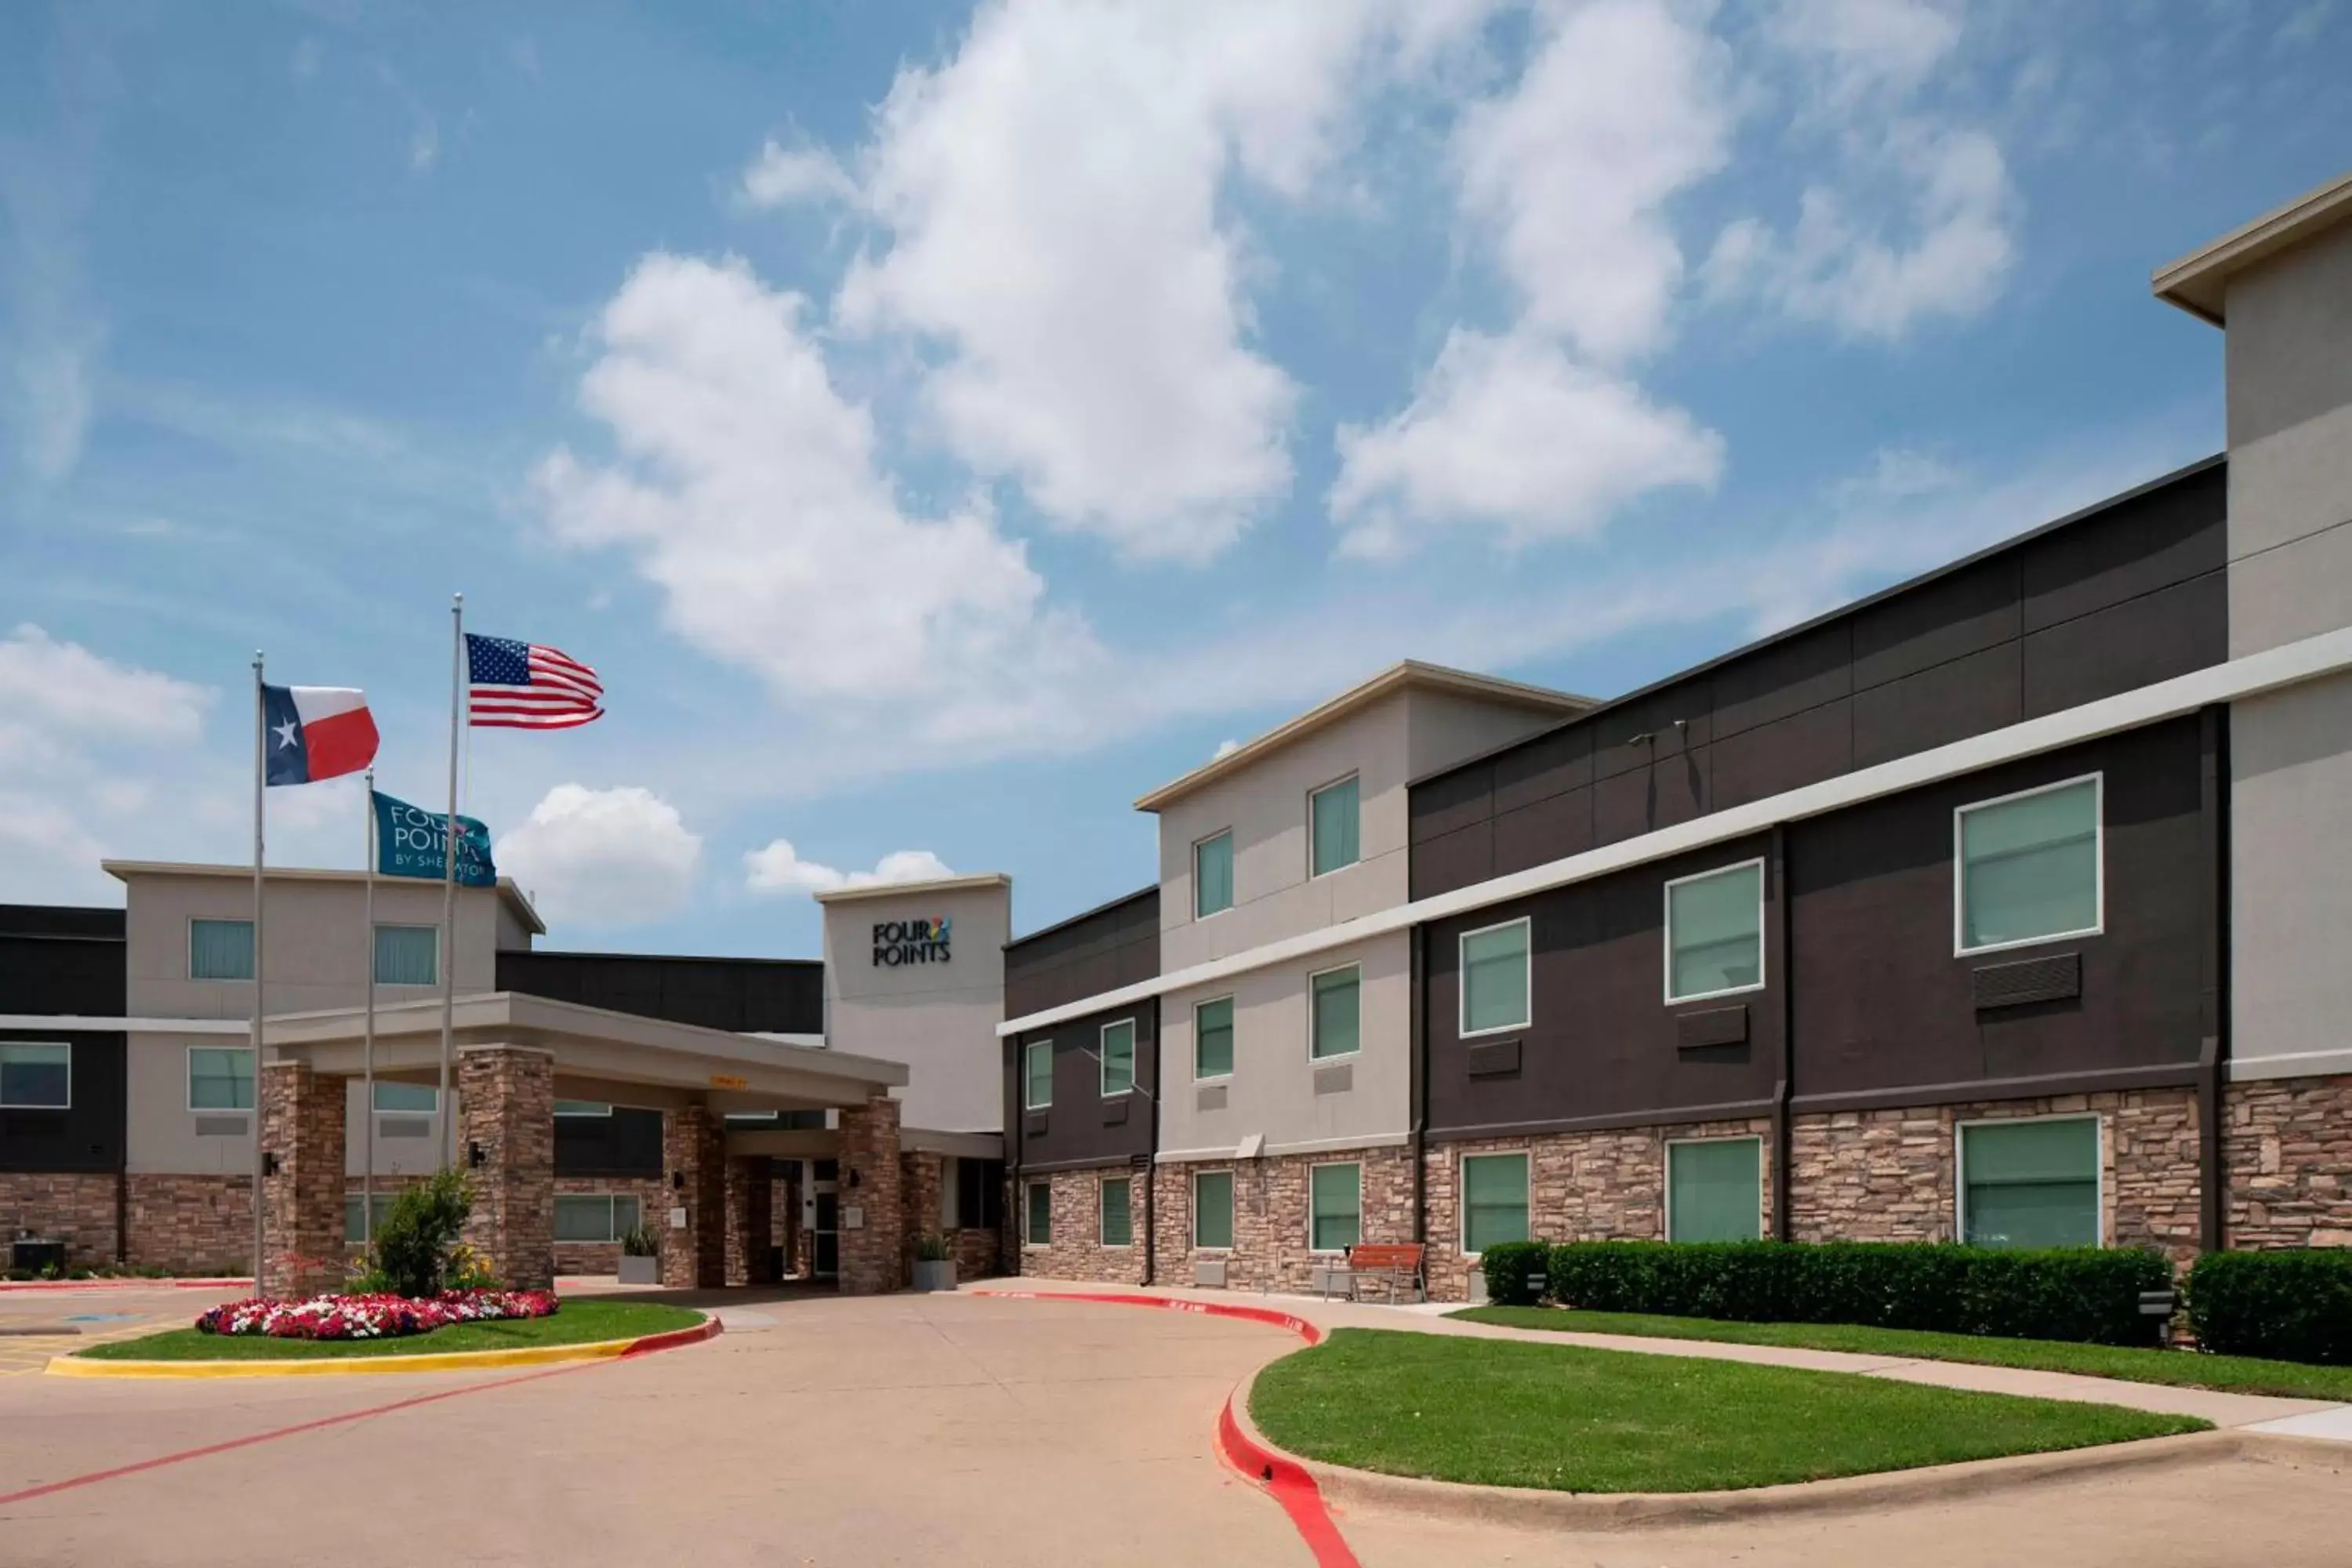 Property Building in Four Points by Sheraton Dallas Arlington Entertainment District